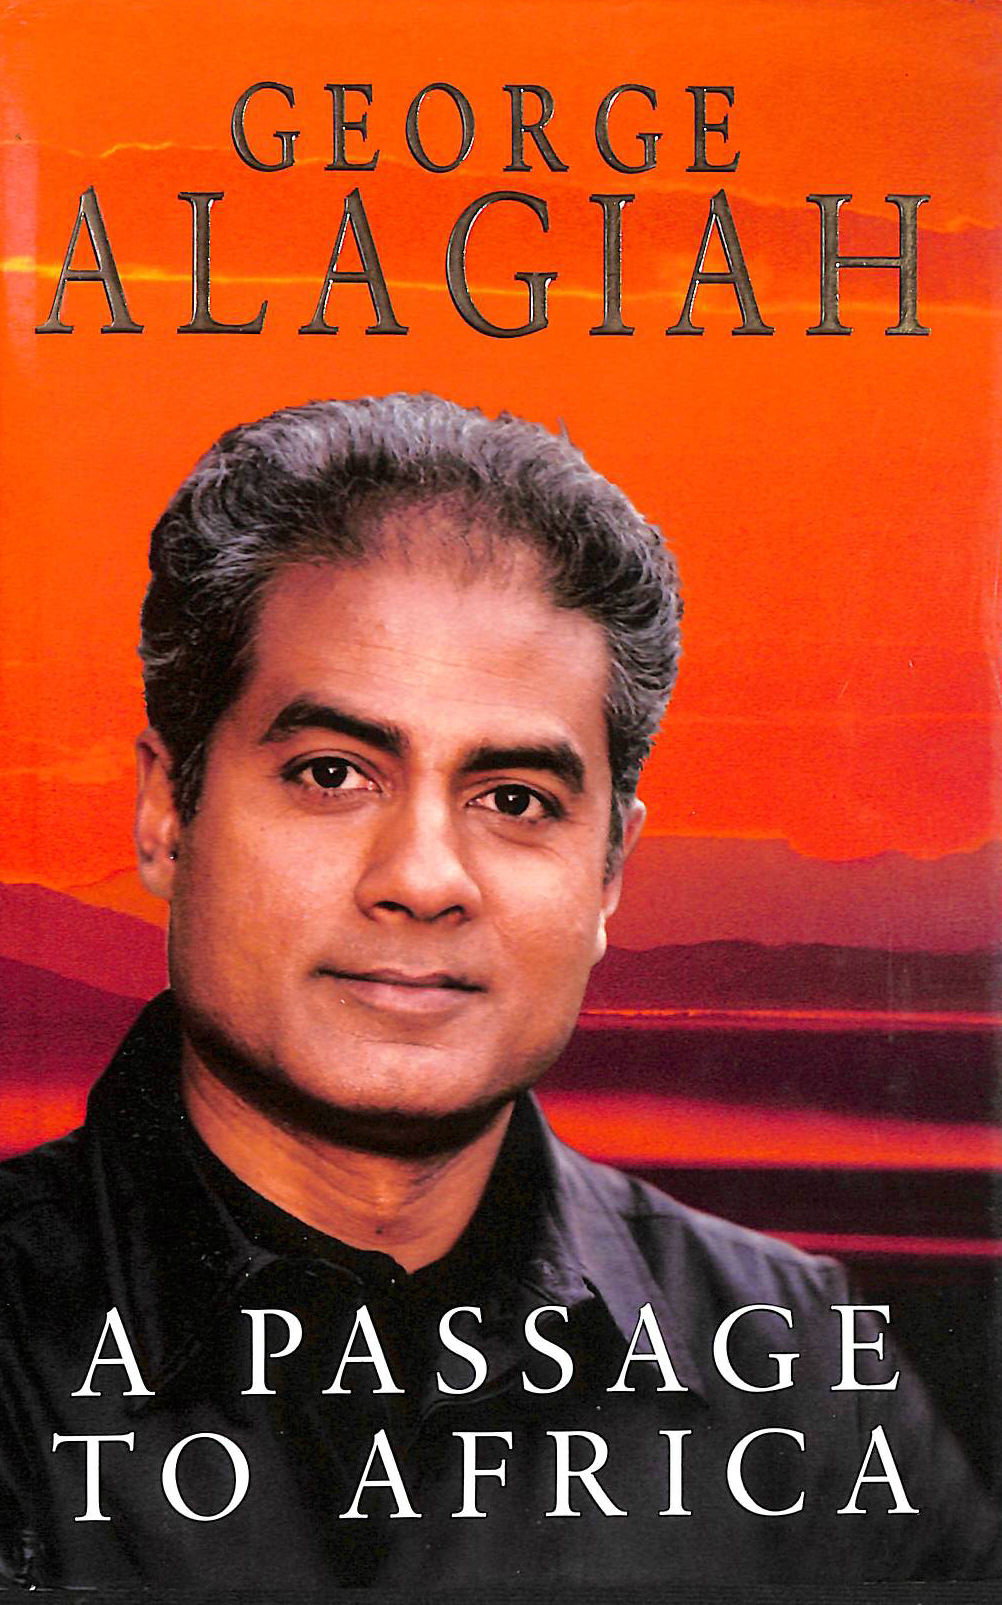 ALAGIAH, GEORGE - A Passage To Africa